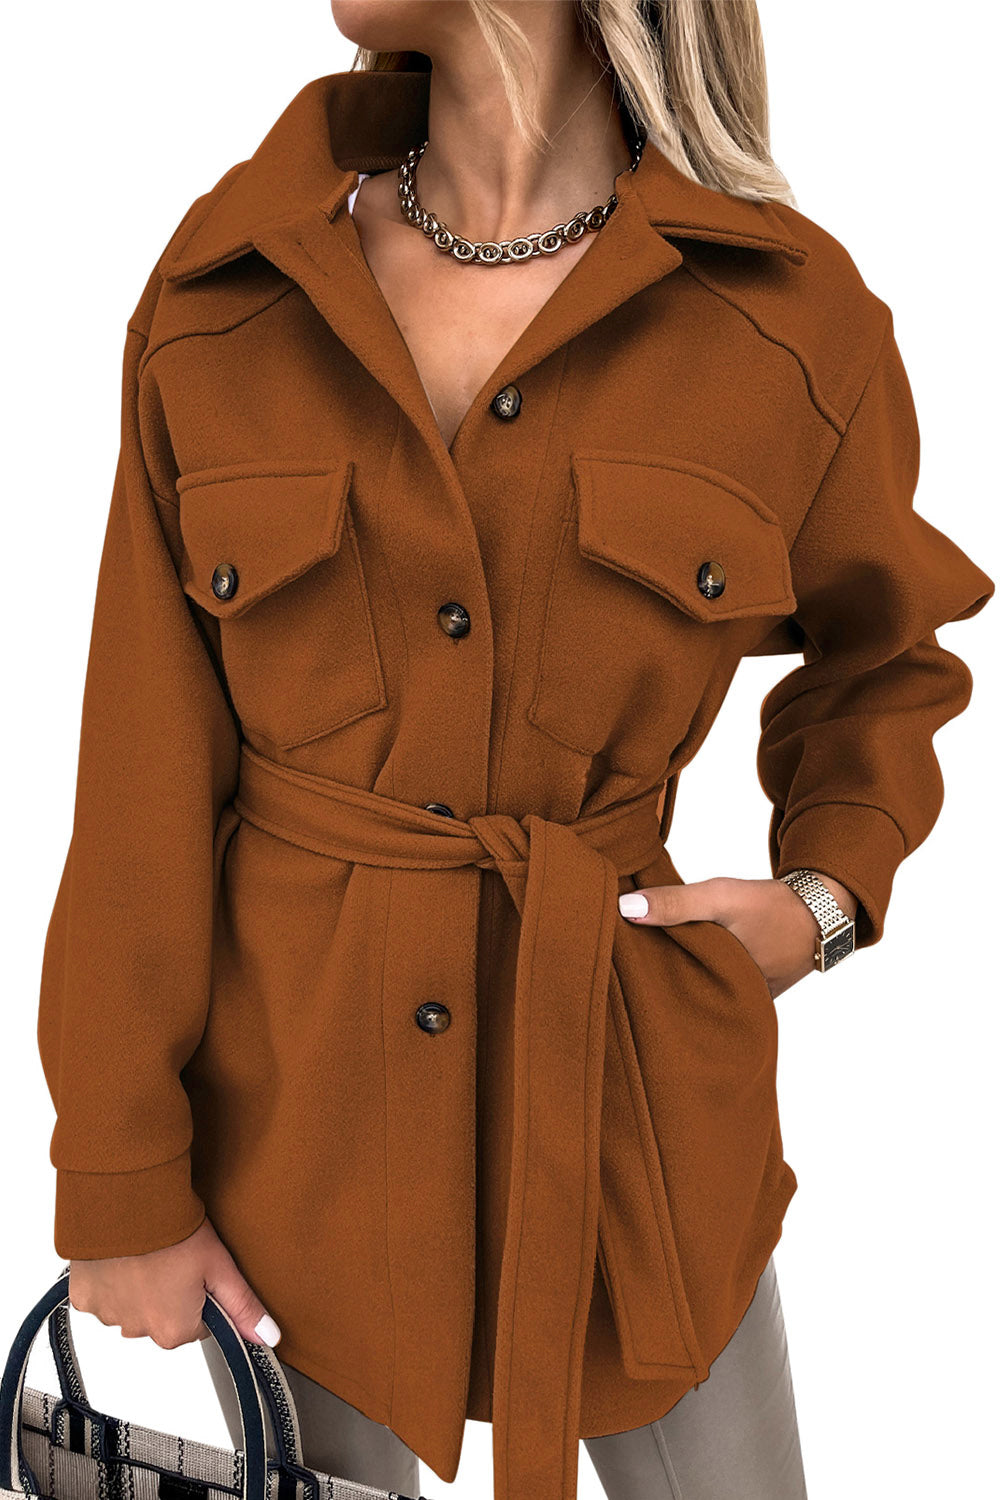 Brown Women's Lapel Button Down Coat Winter Belted Coat with Pockets LC8511359-17